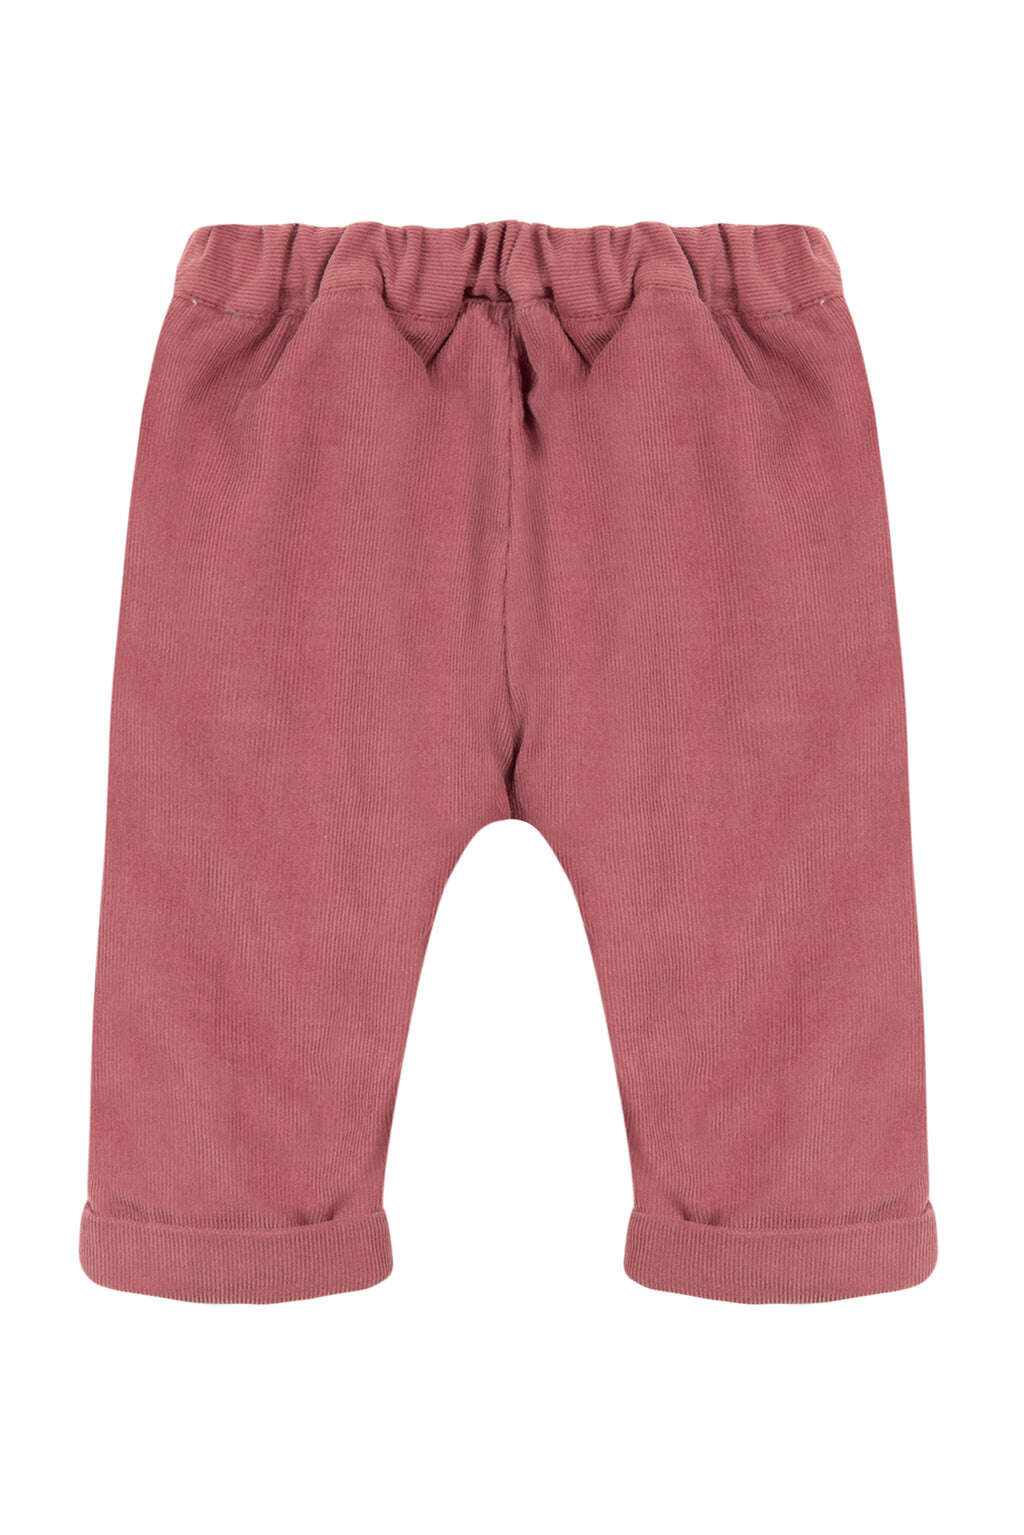 Trousers - Old Pink Corduroy